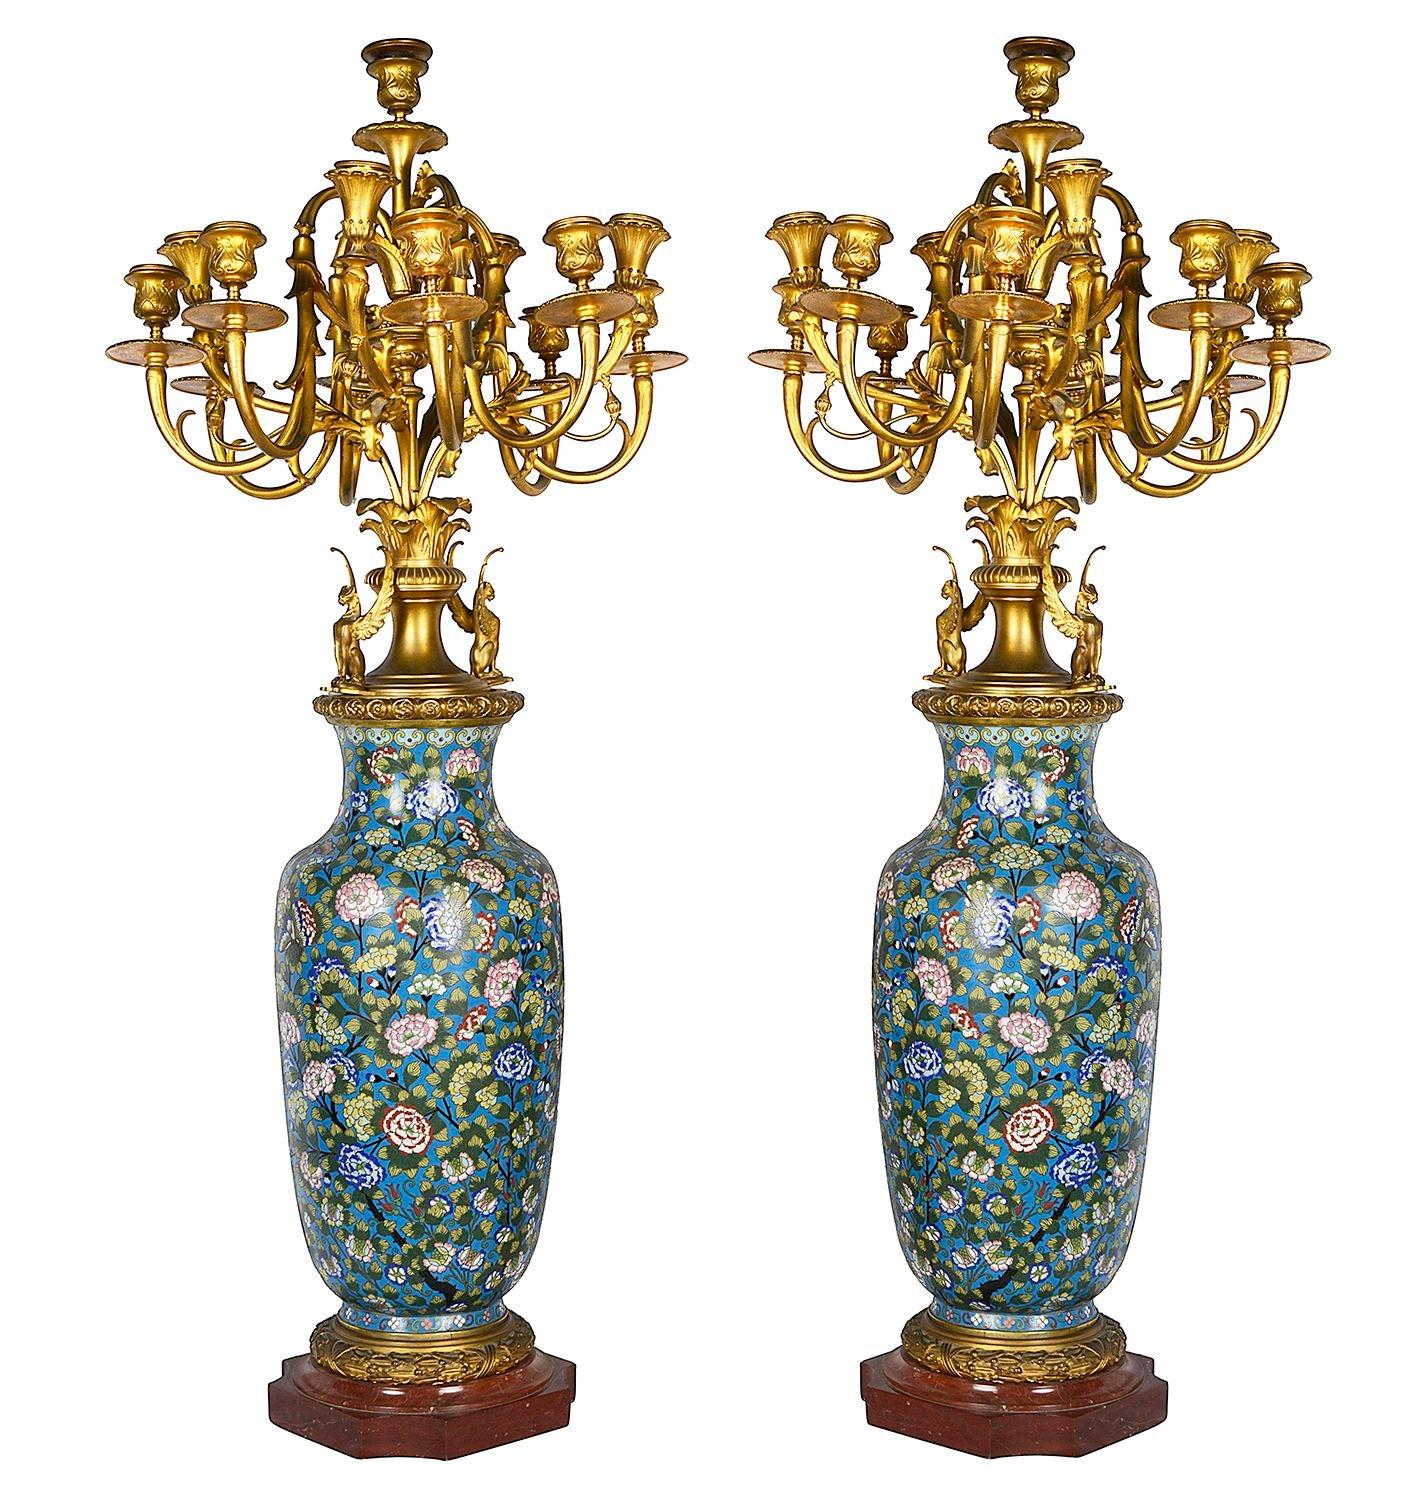 A wonderful quality pair of late 19th Century French Cloisonné enamel and gilded ormolu 12 branch candelabra. Having wonderful bold colouring to the floral design enamel decoration, mounted on Rouge marble plinth bases.
In the manner of Ferdinand